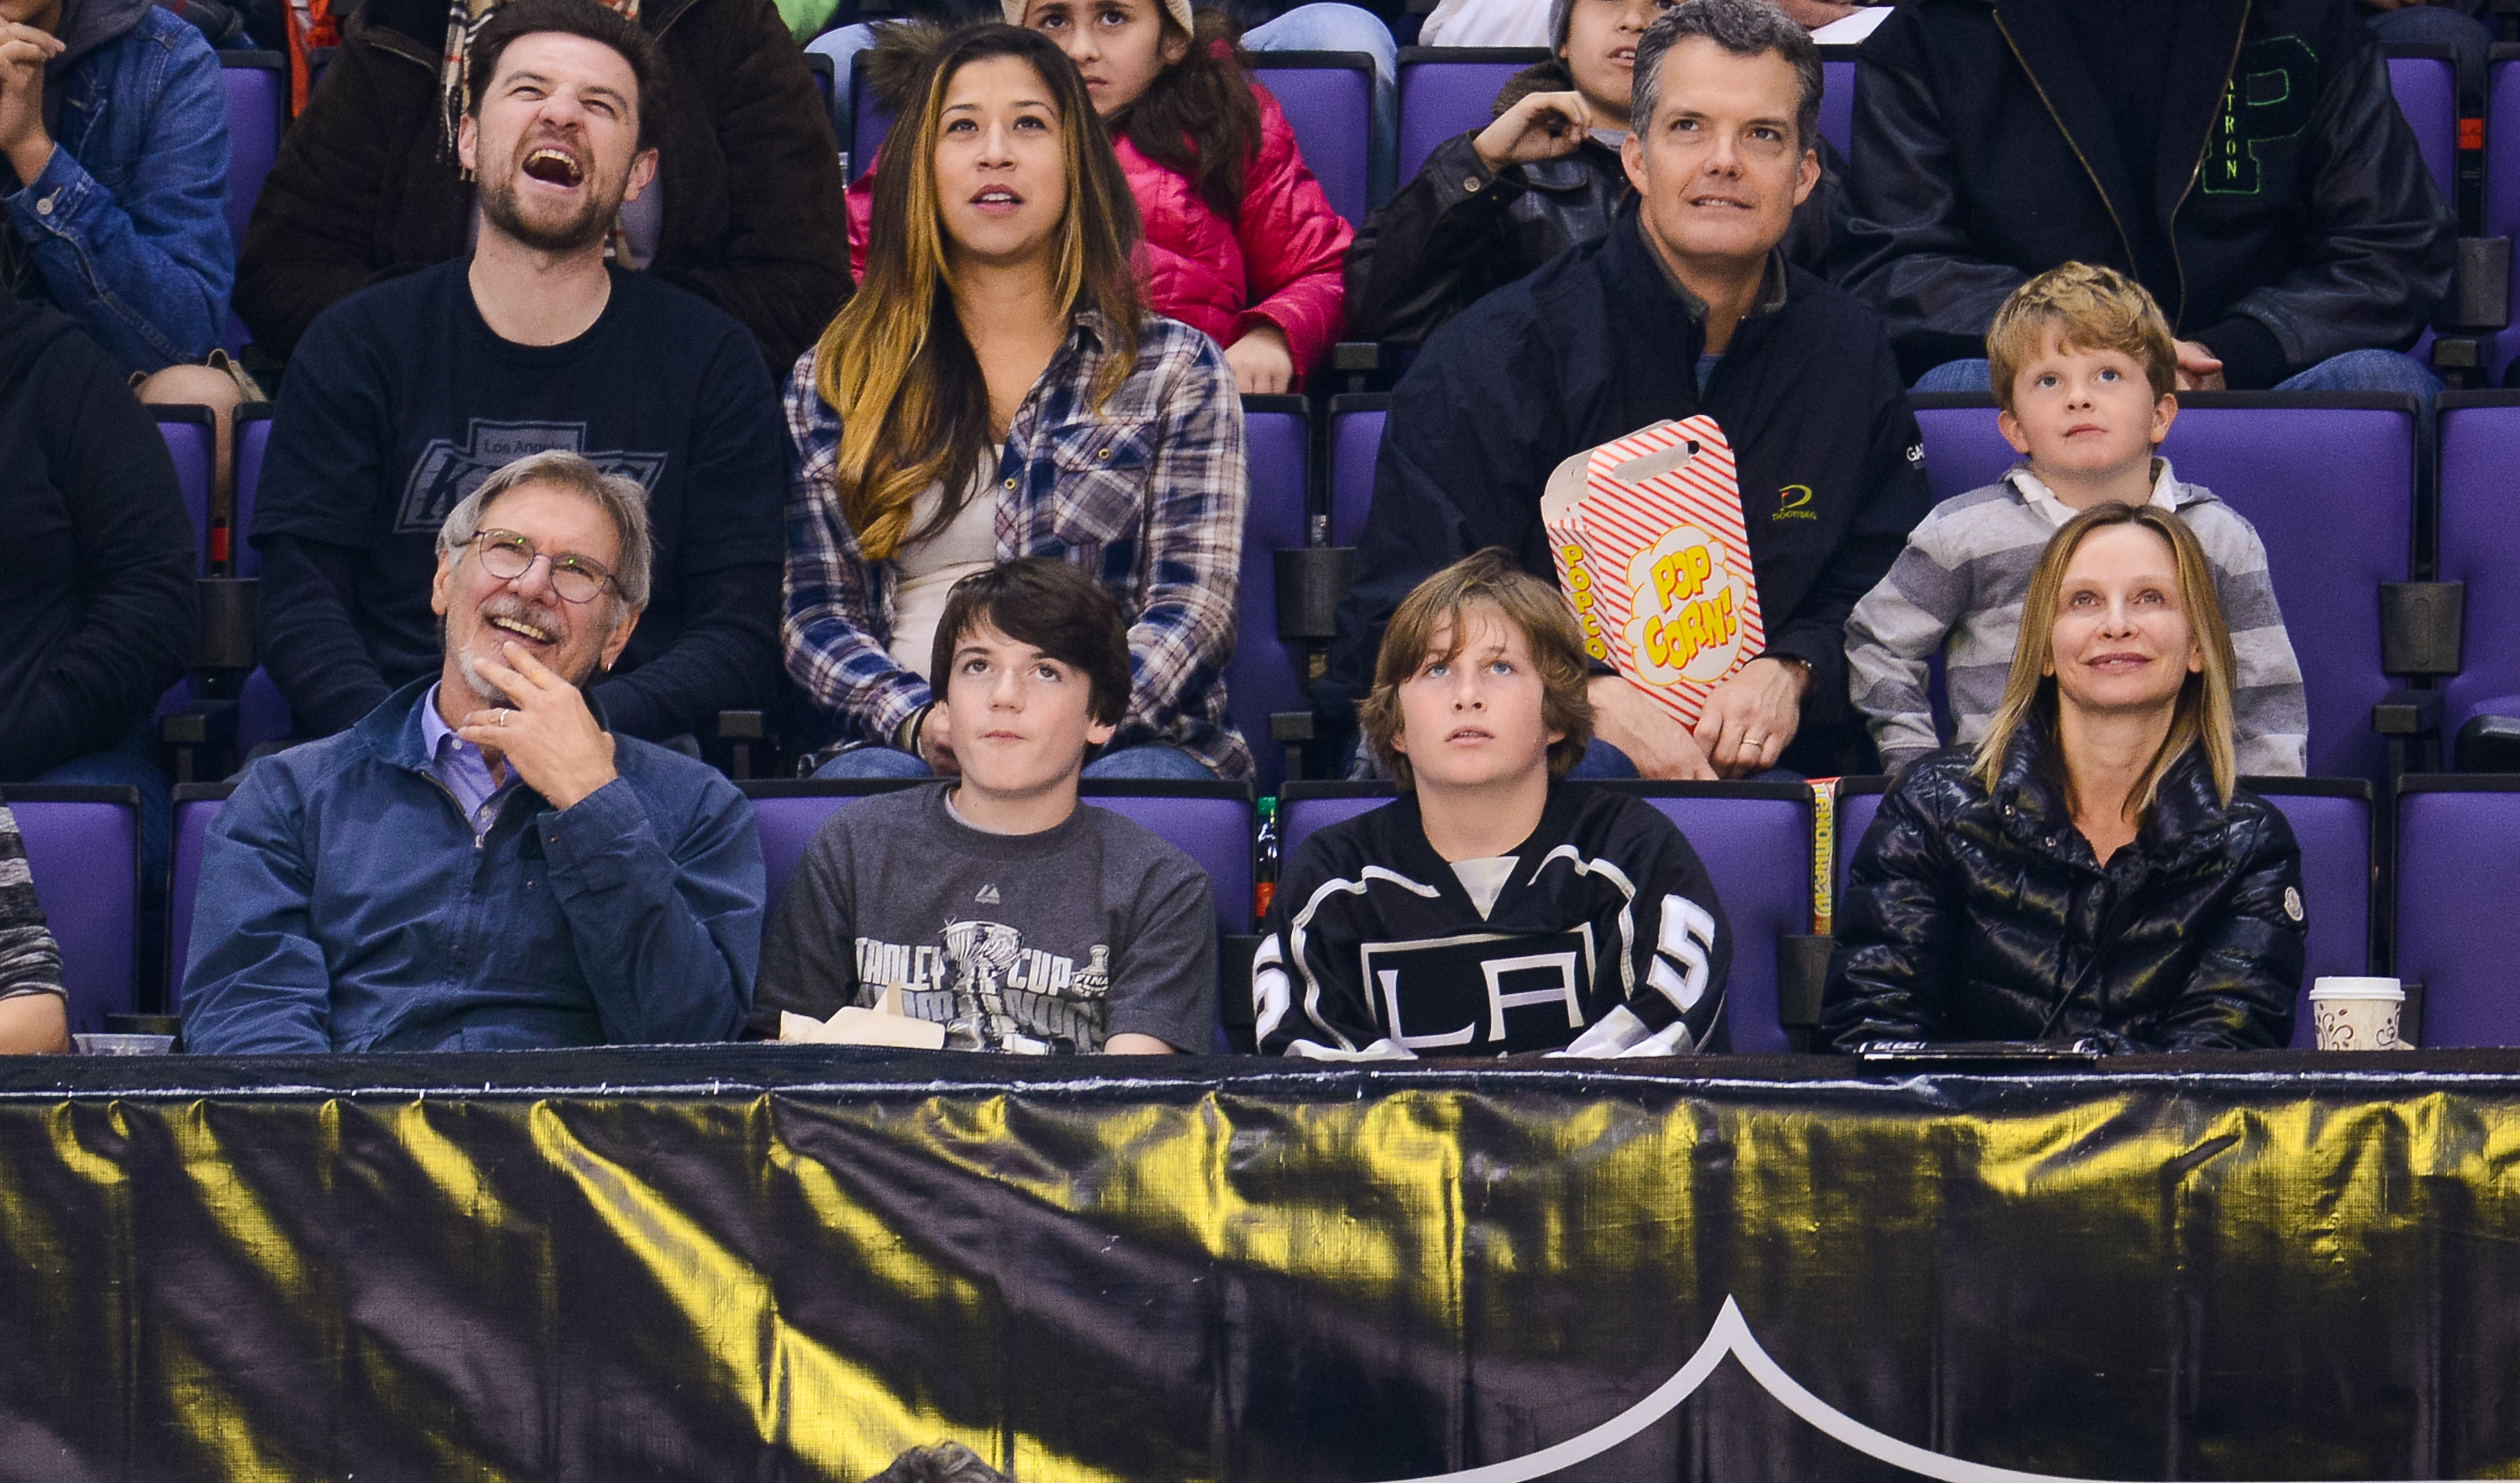 Harrison Ford, Liam Flockhart, and Calista Flockhart at a hockey game in Los Angeles, California on March 1, 2014 | Source: Getty Images